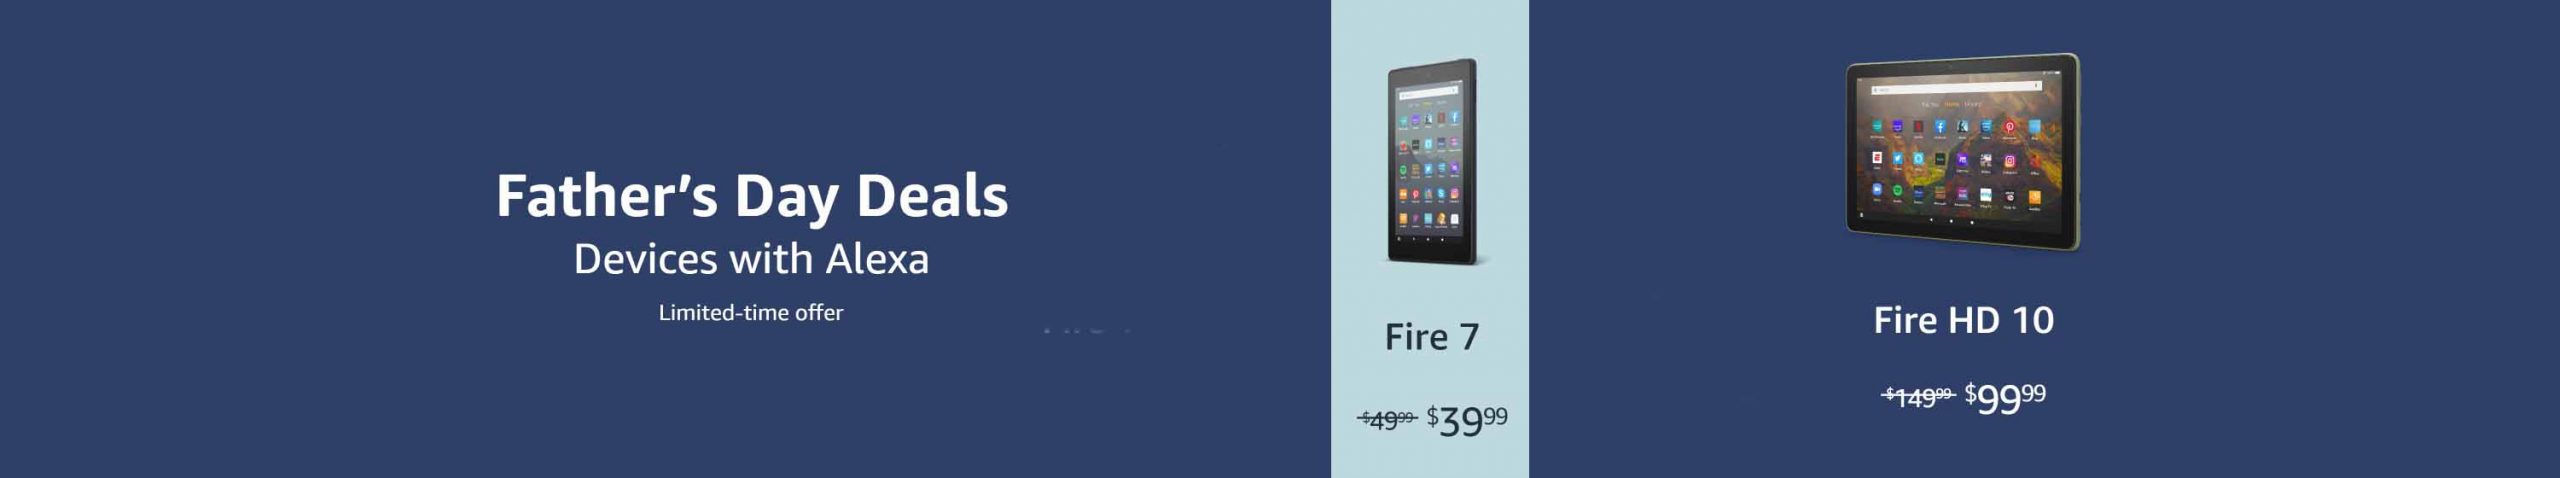 Fire Tablets promo